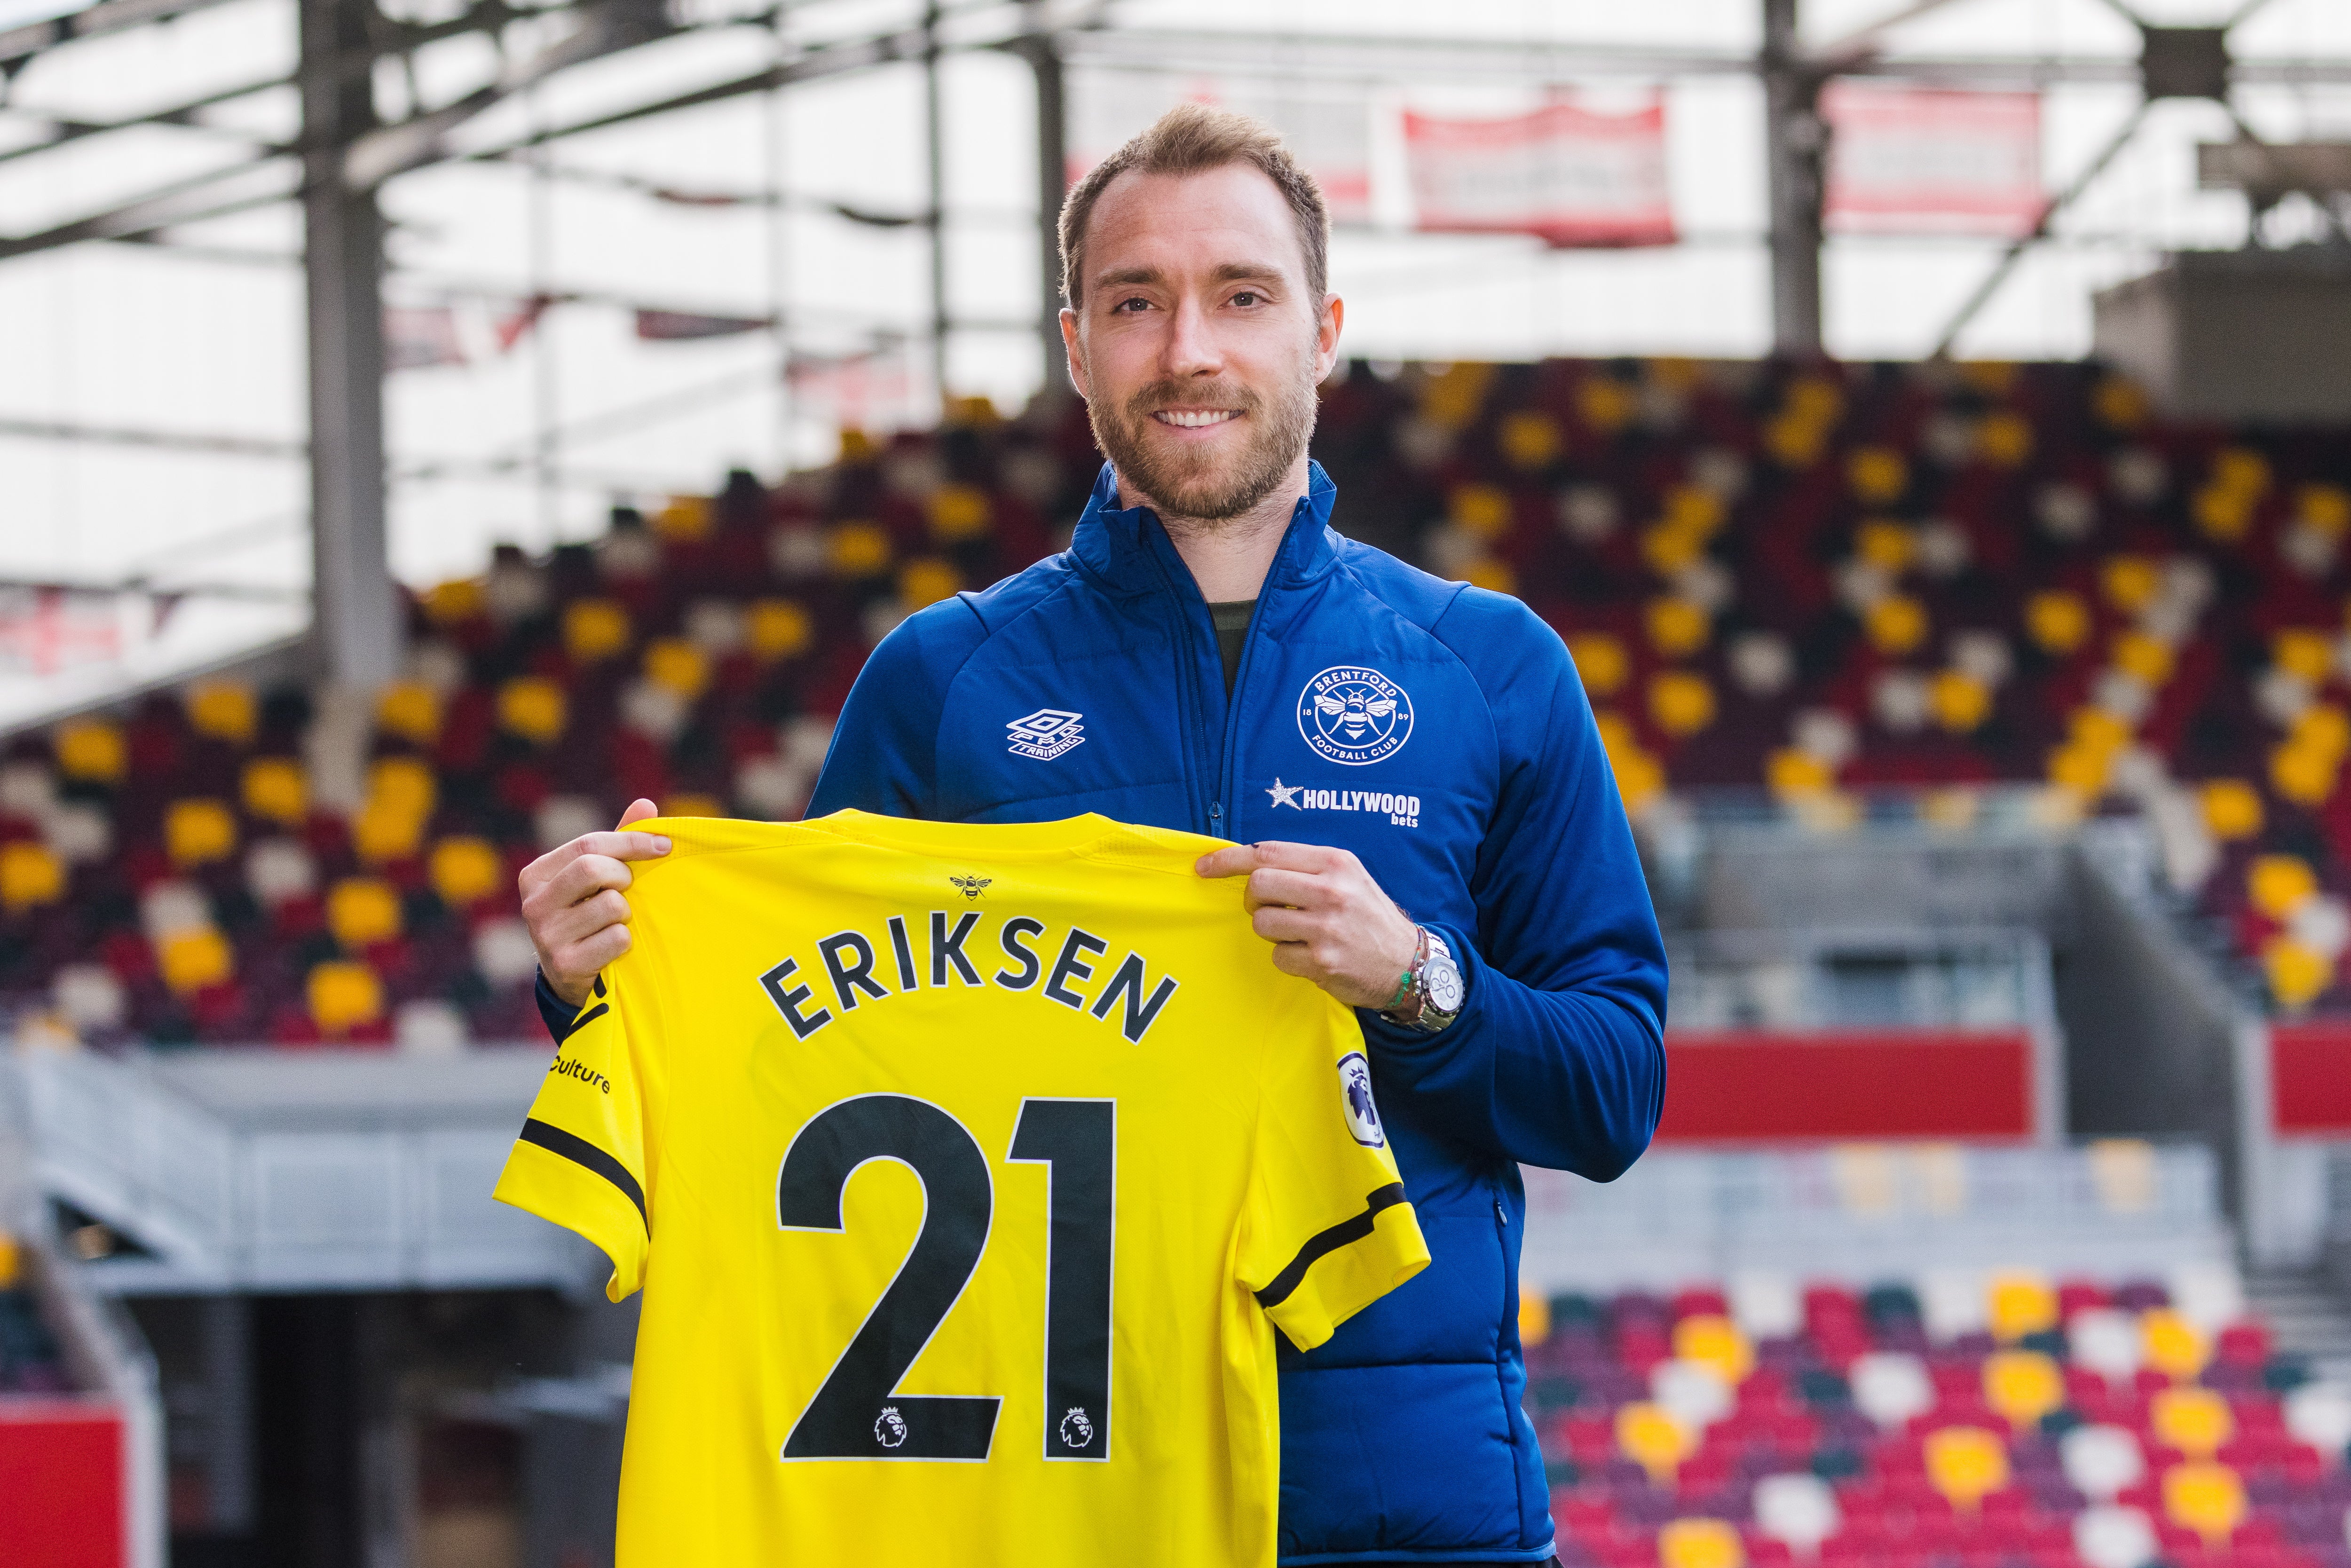 Christian Eriksen is presented as a new Brentford player